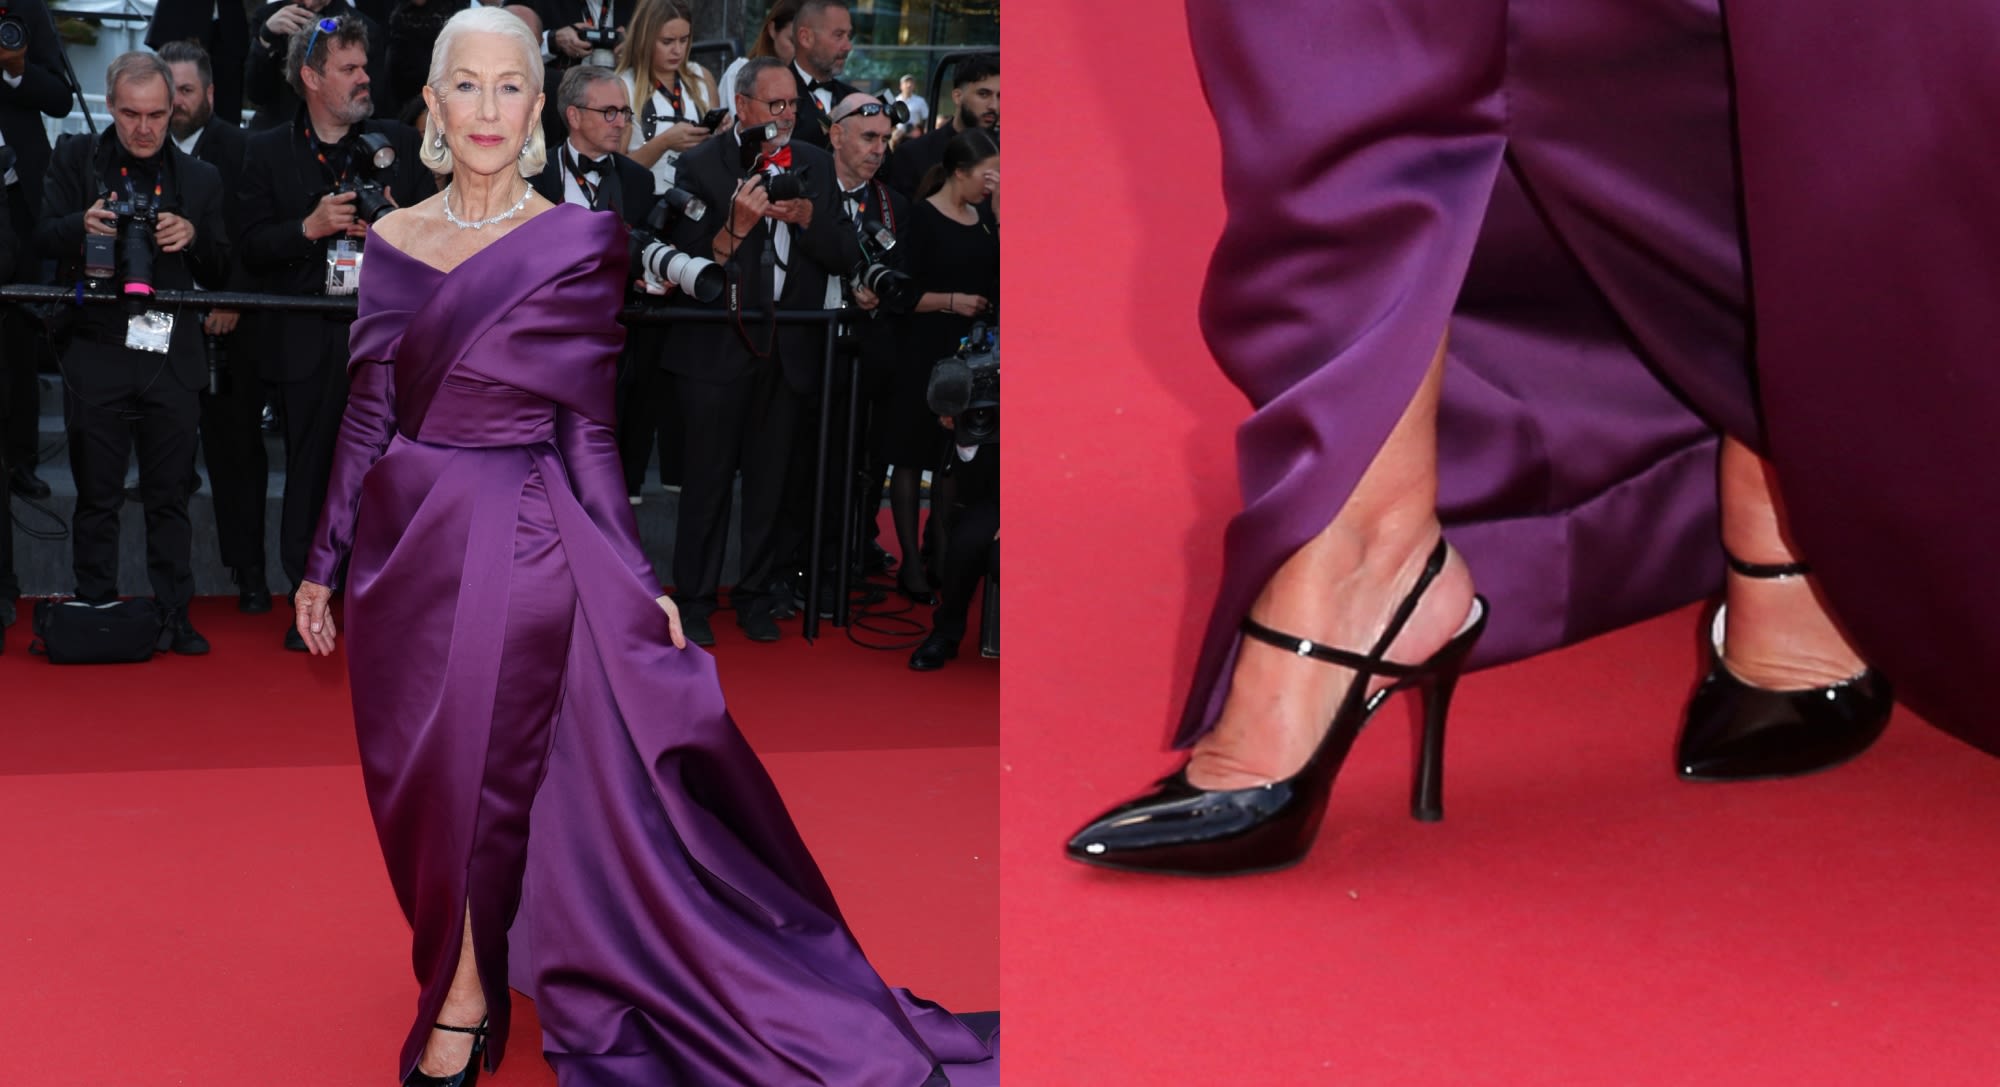 Helen Mirren Graces Cannes Film Festival Red Carpet in Royal Purple Gown and Patent Leather Heels